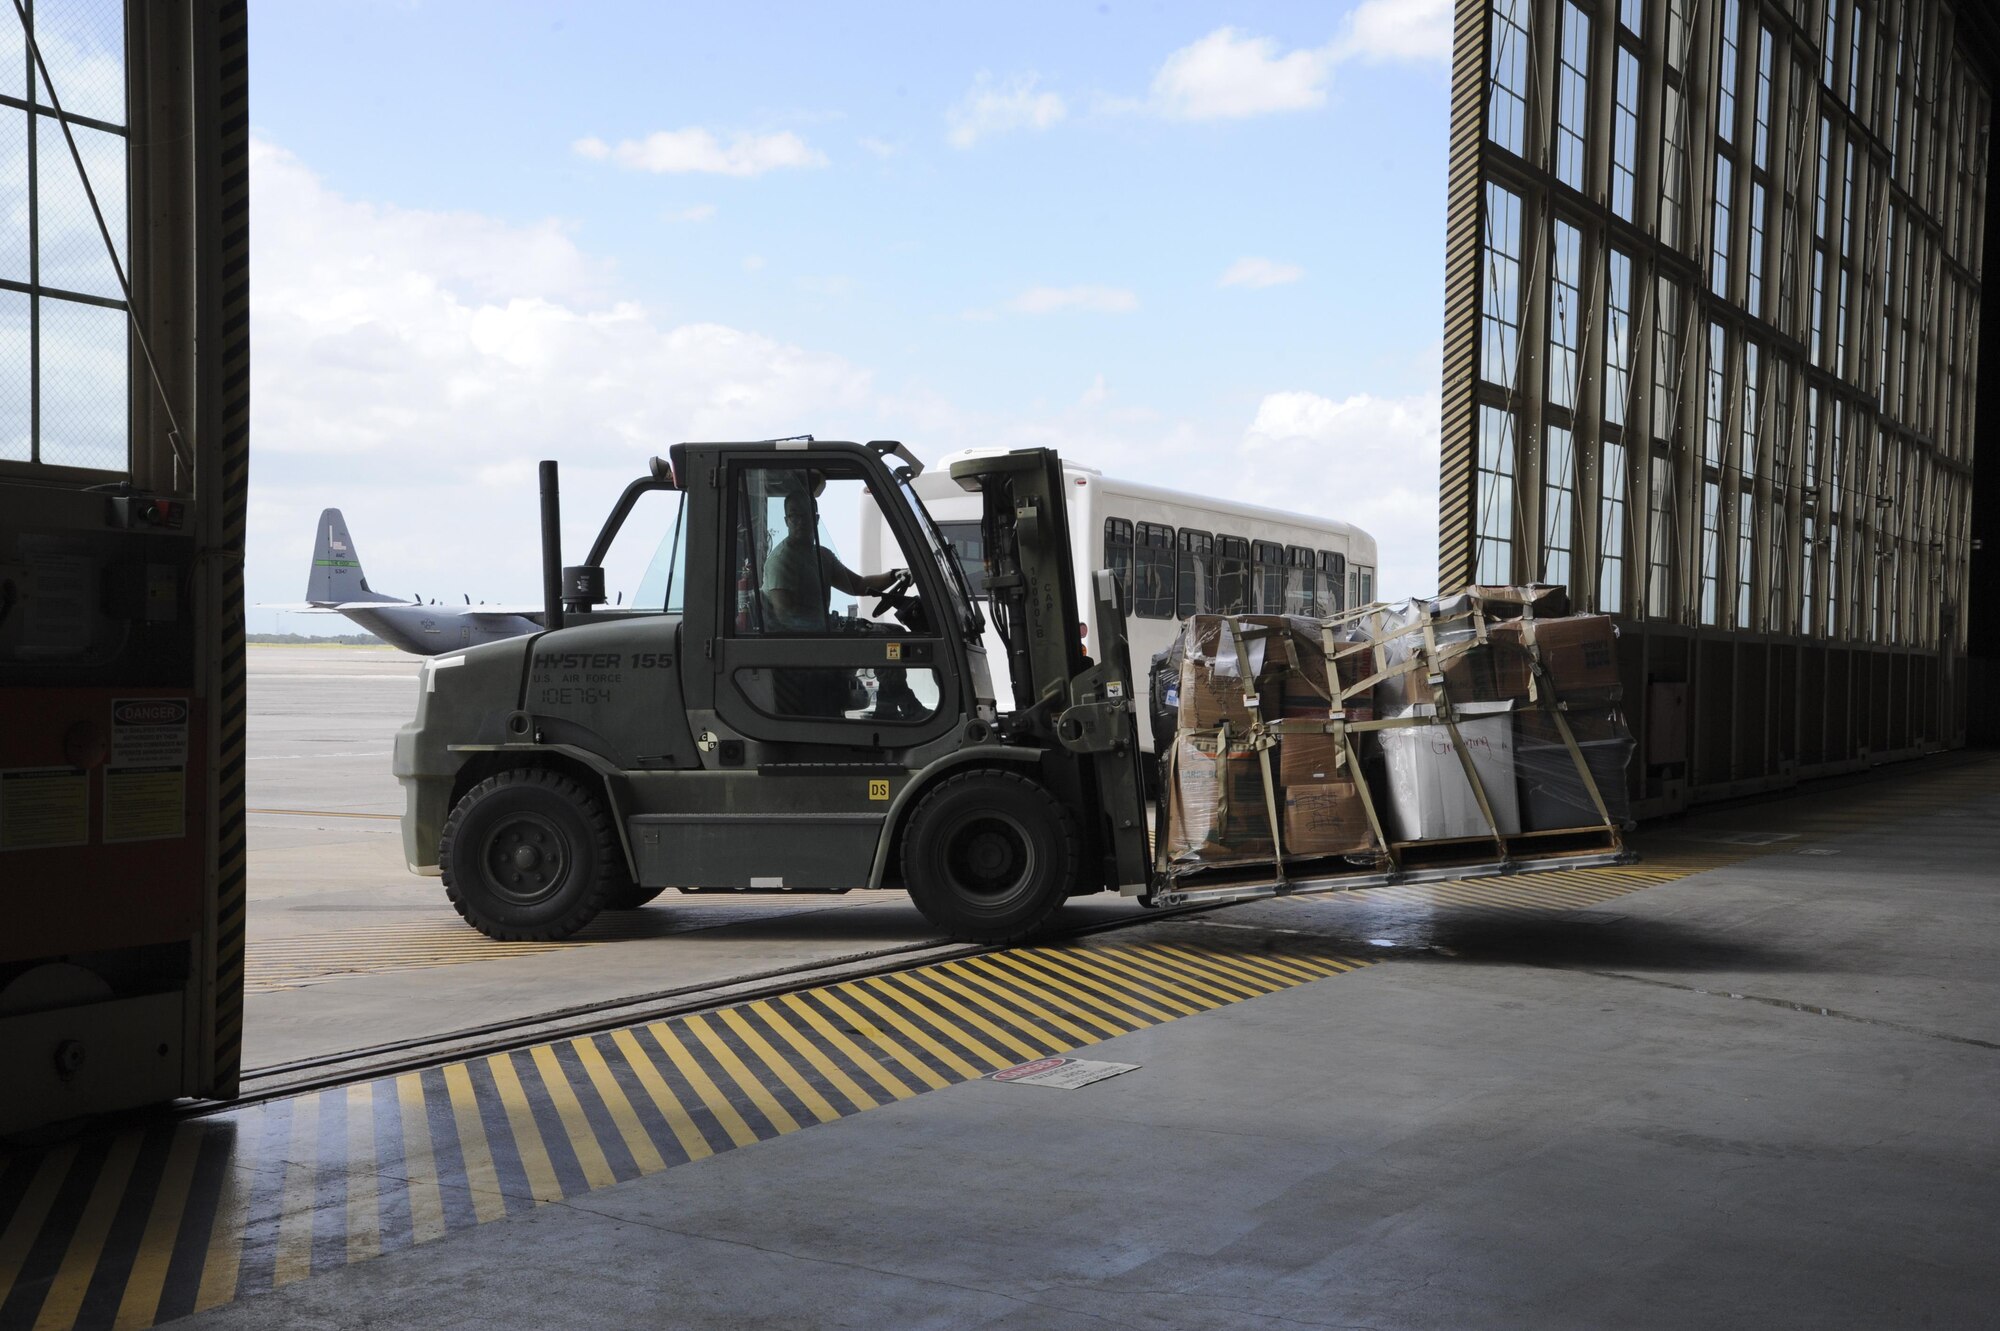 A U.S. Air Force Airman with the 6th Logistics Readiness Squadron (LRS) transports cargo to the flightline at MacDill Air Force Base, Fla., Oct. 4, 2017.